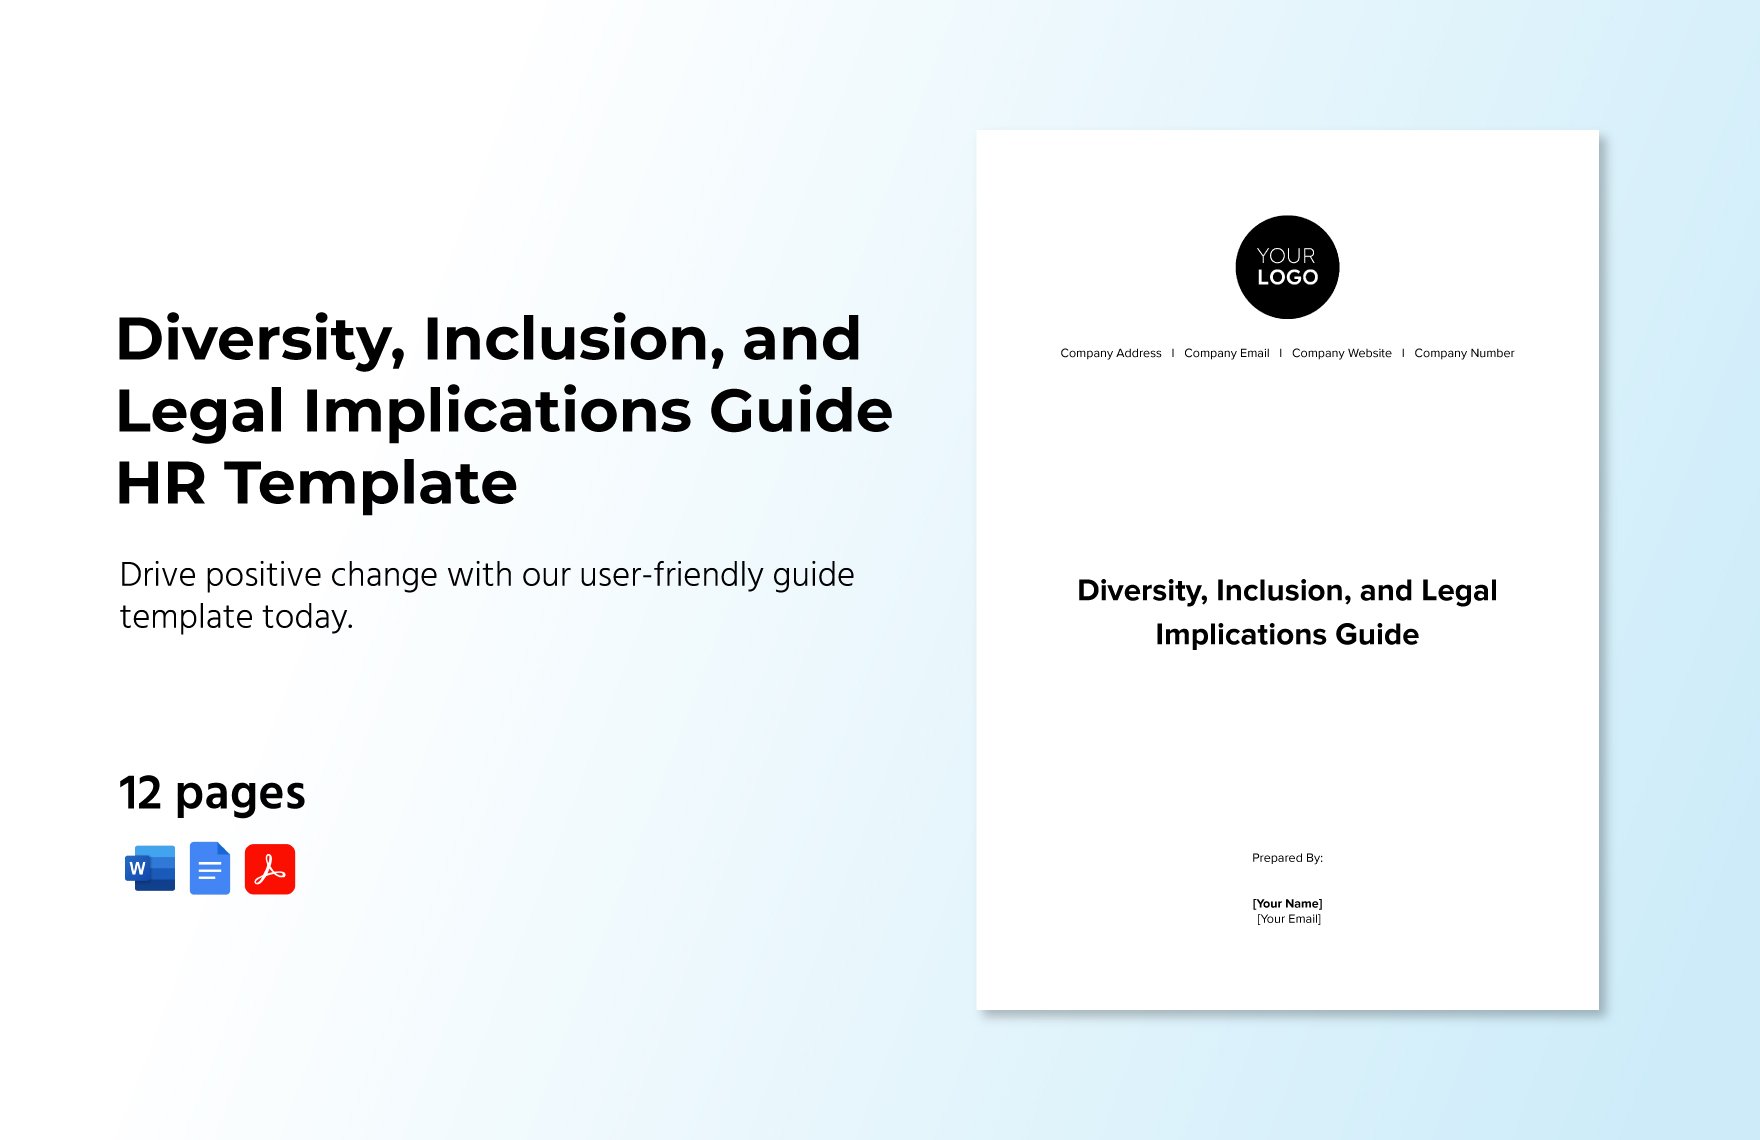 Diversity, Inclusion, and Legal Implications Guide HR Template